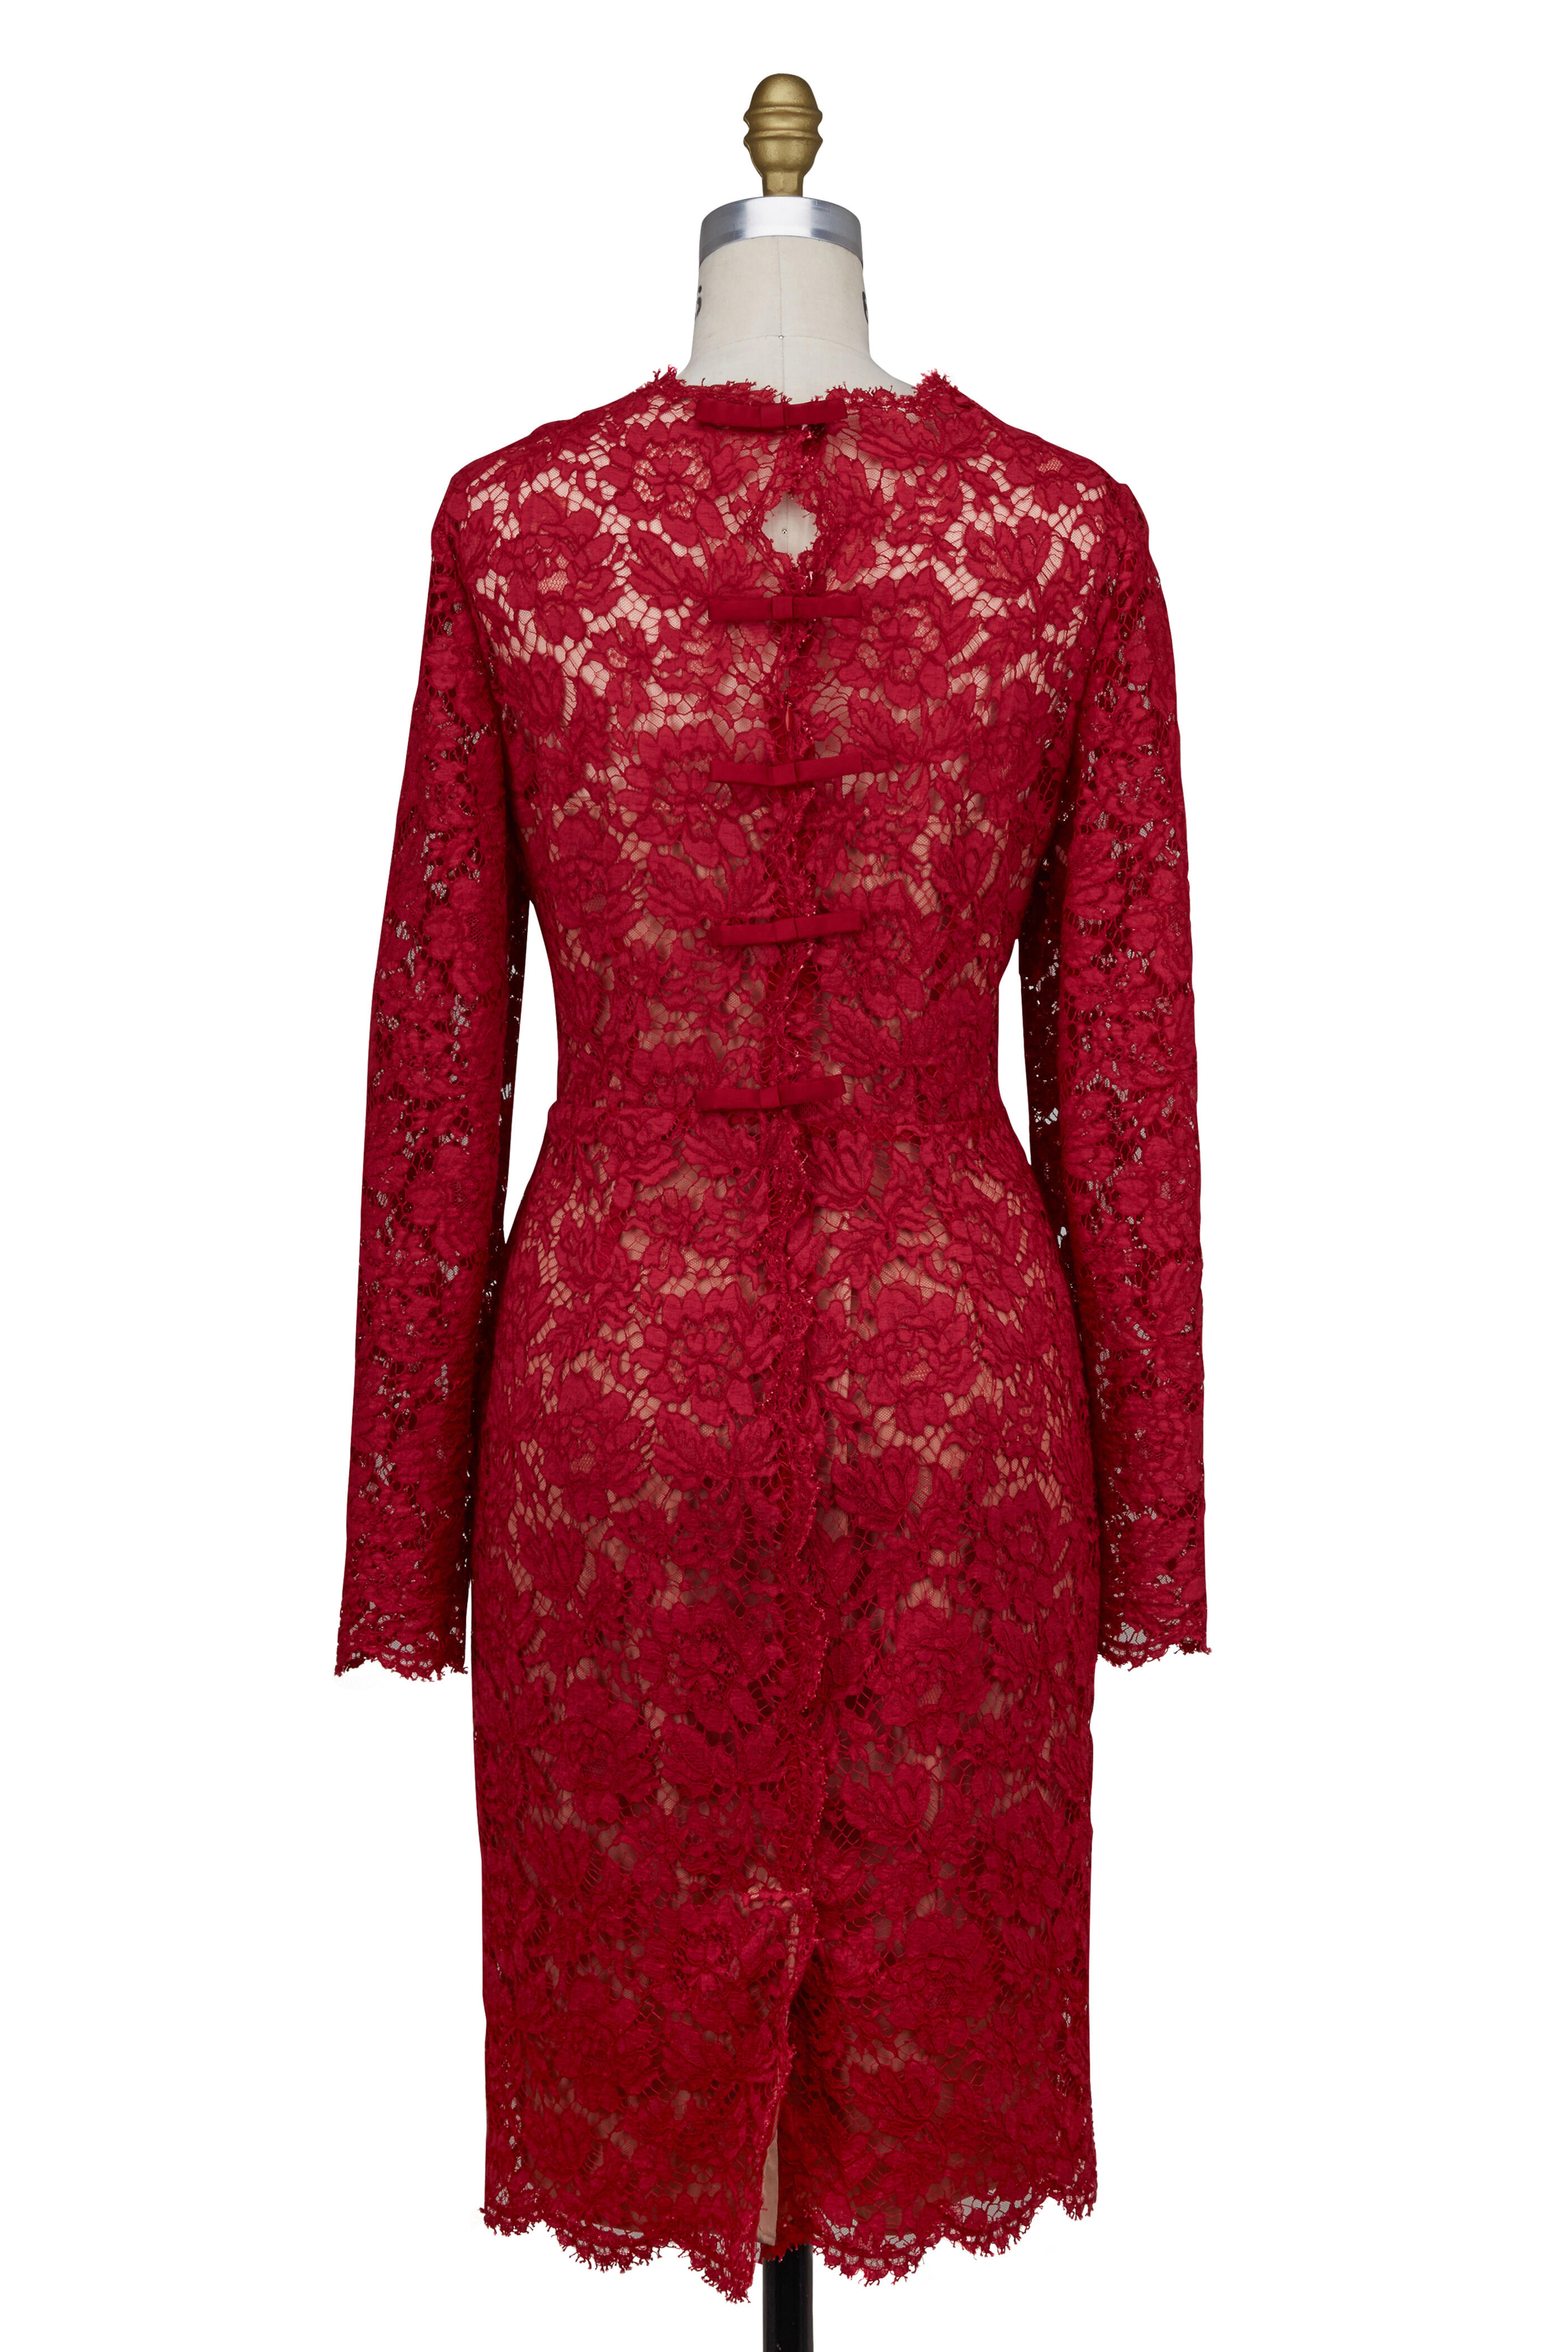 Valentino - Lace Bow-Back Dress | Mitchell Stores